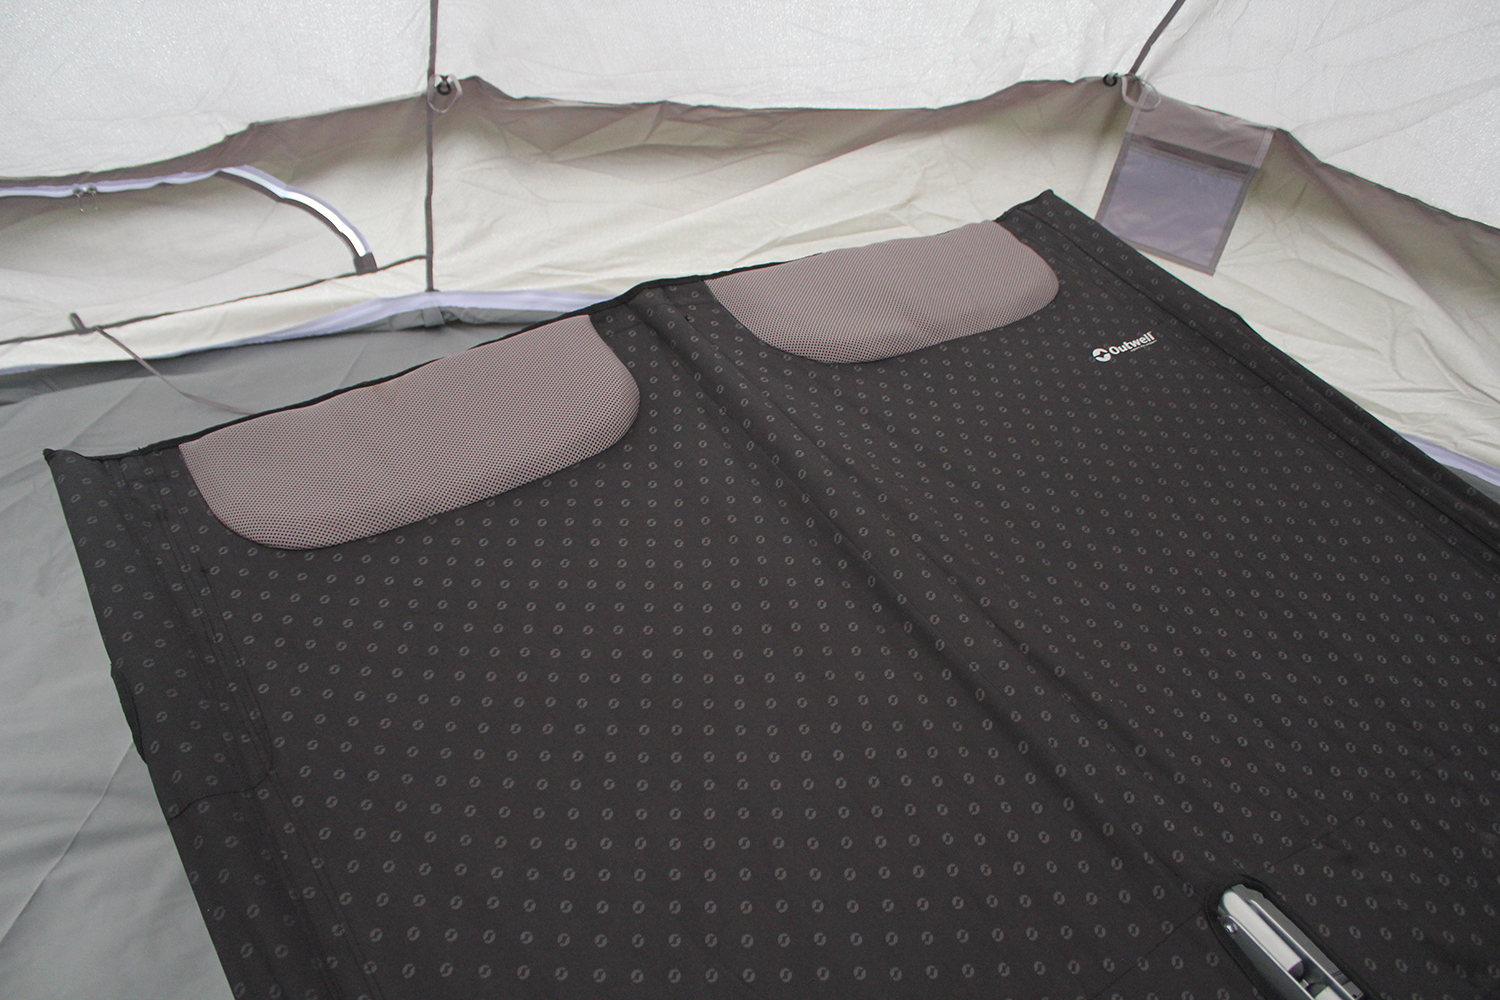 The Outwell Centuple Double Foldaway Camp Bed